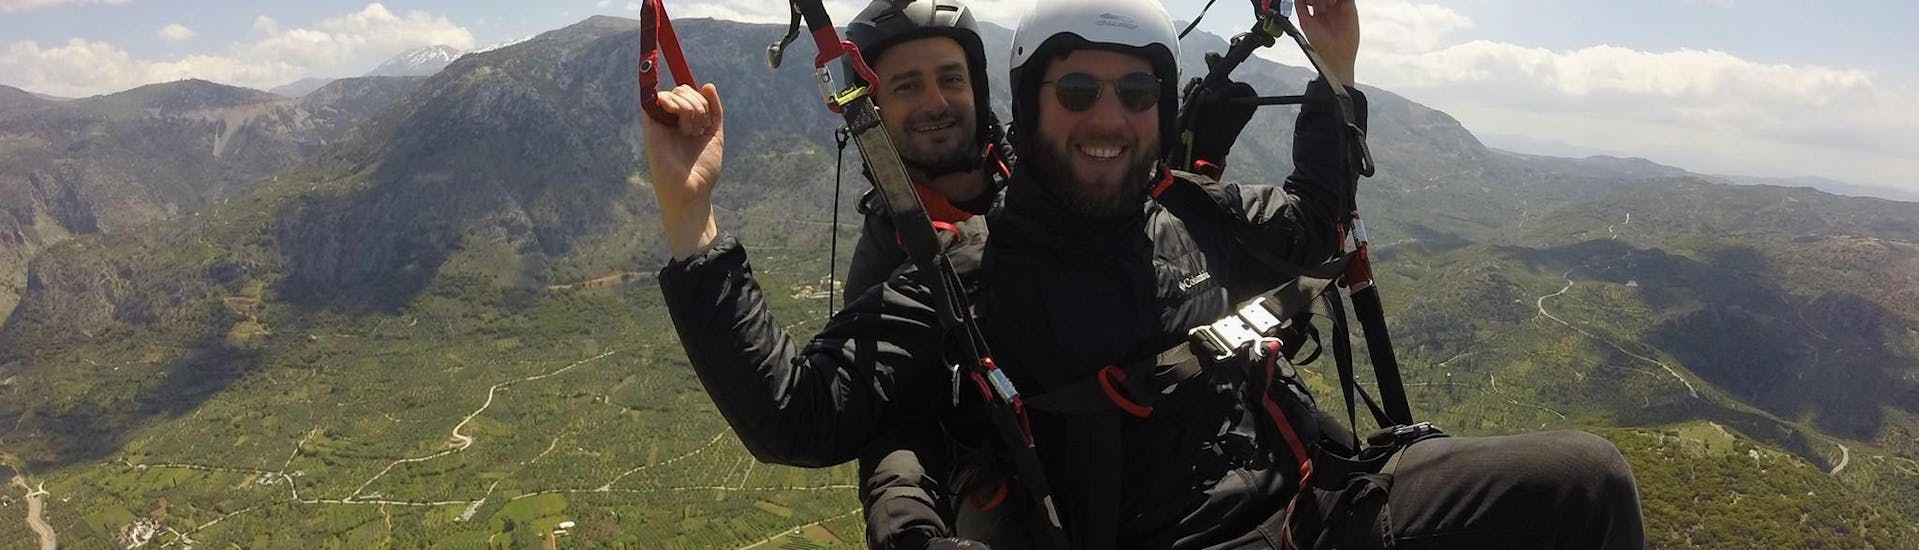 During the tandem paragliding above Chania, a man is having a great time flying safely with a certified tandem pilot from Cretan Paragliding.